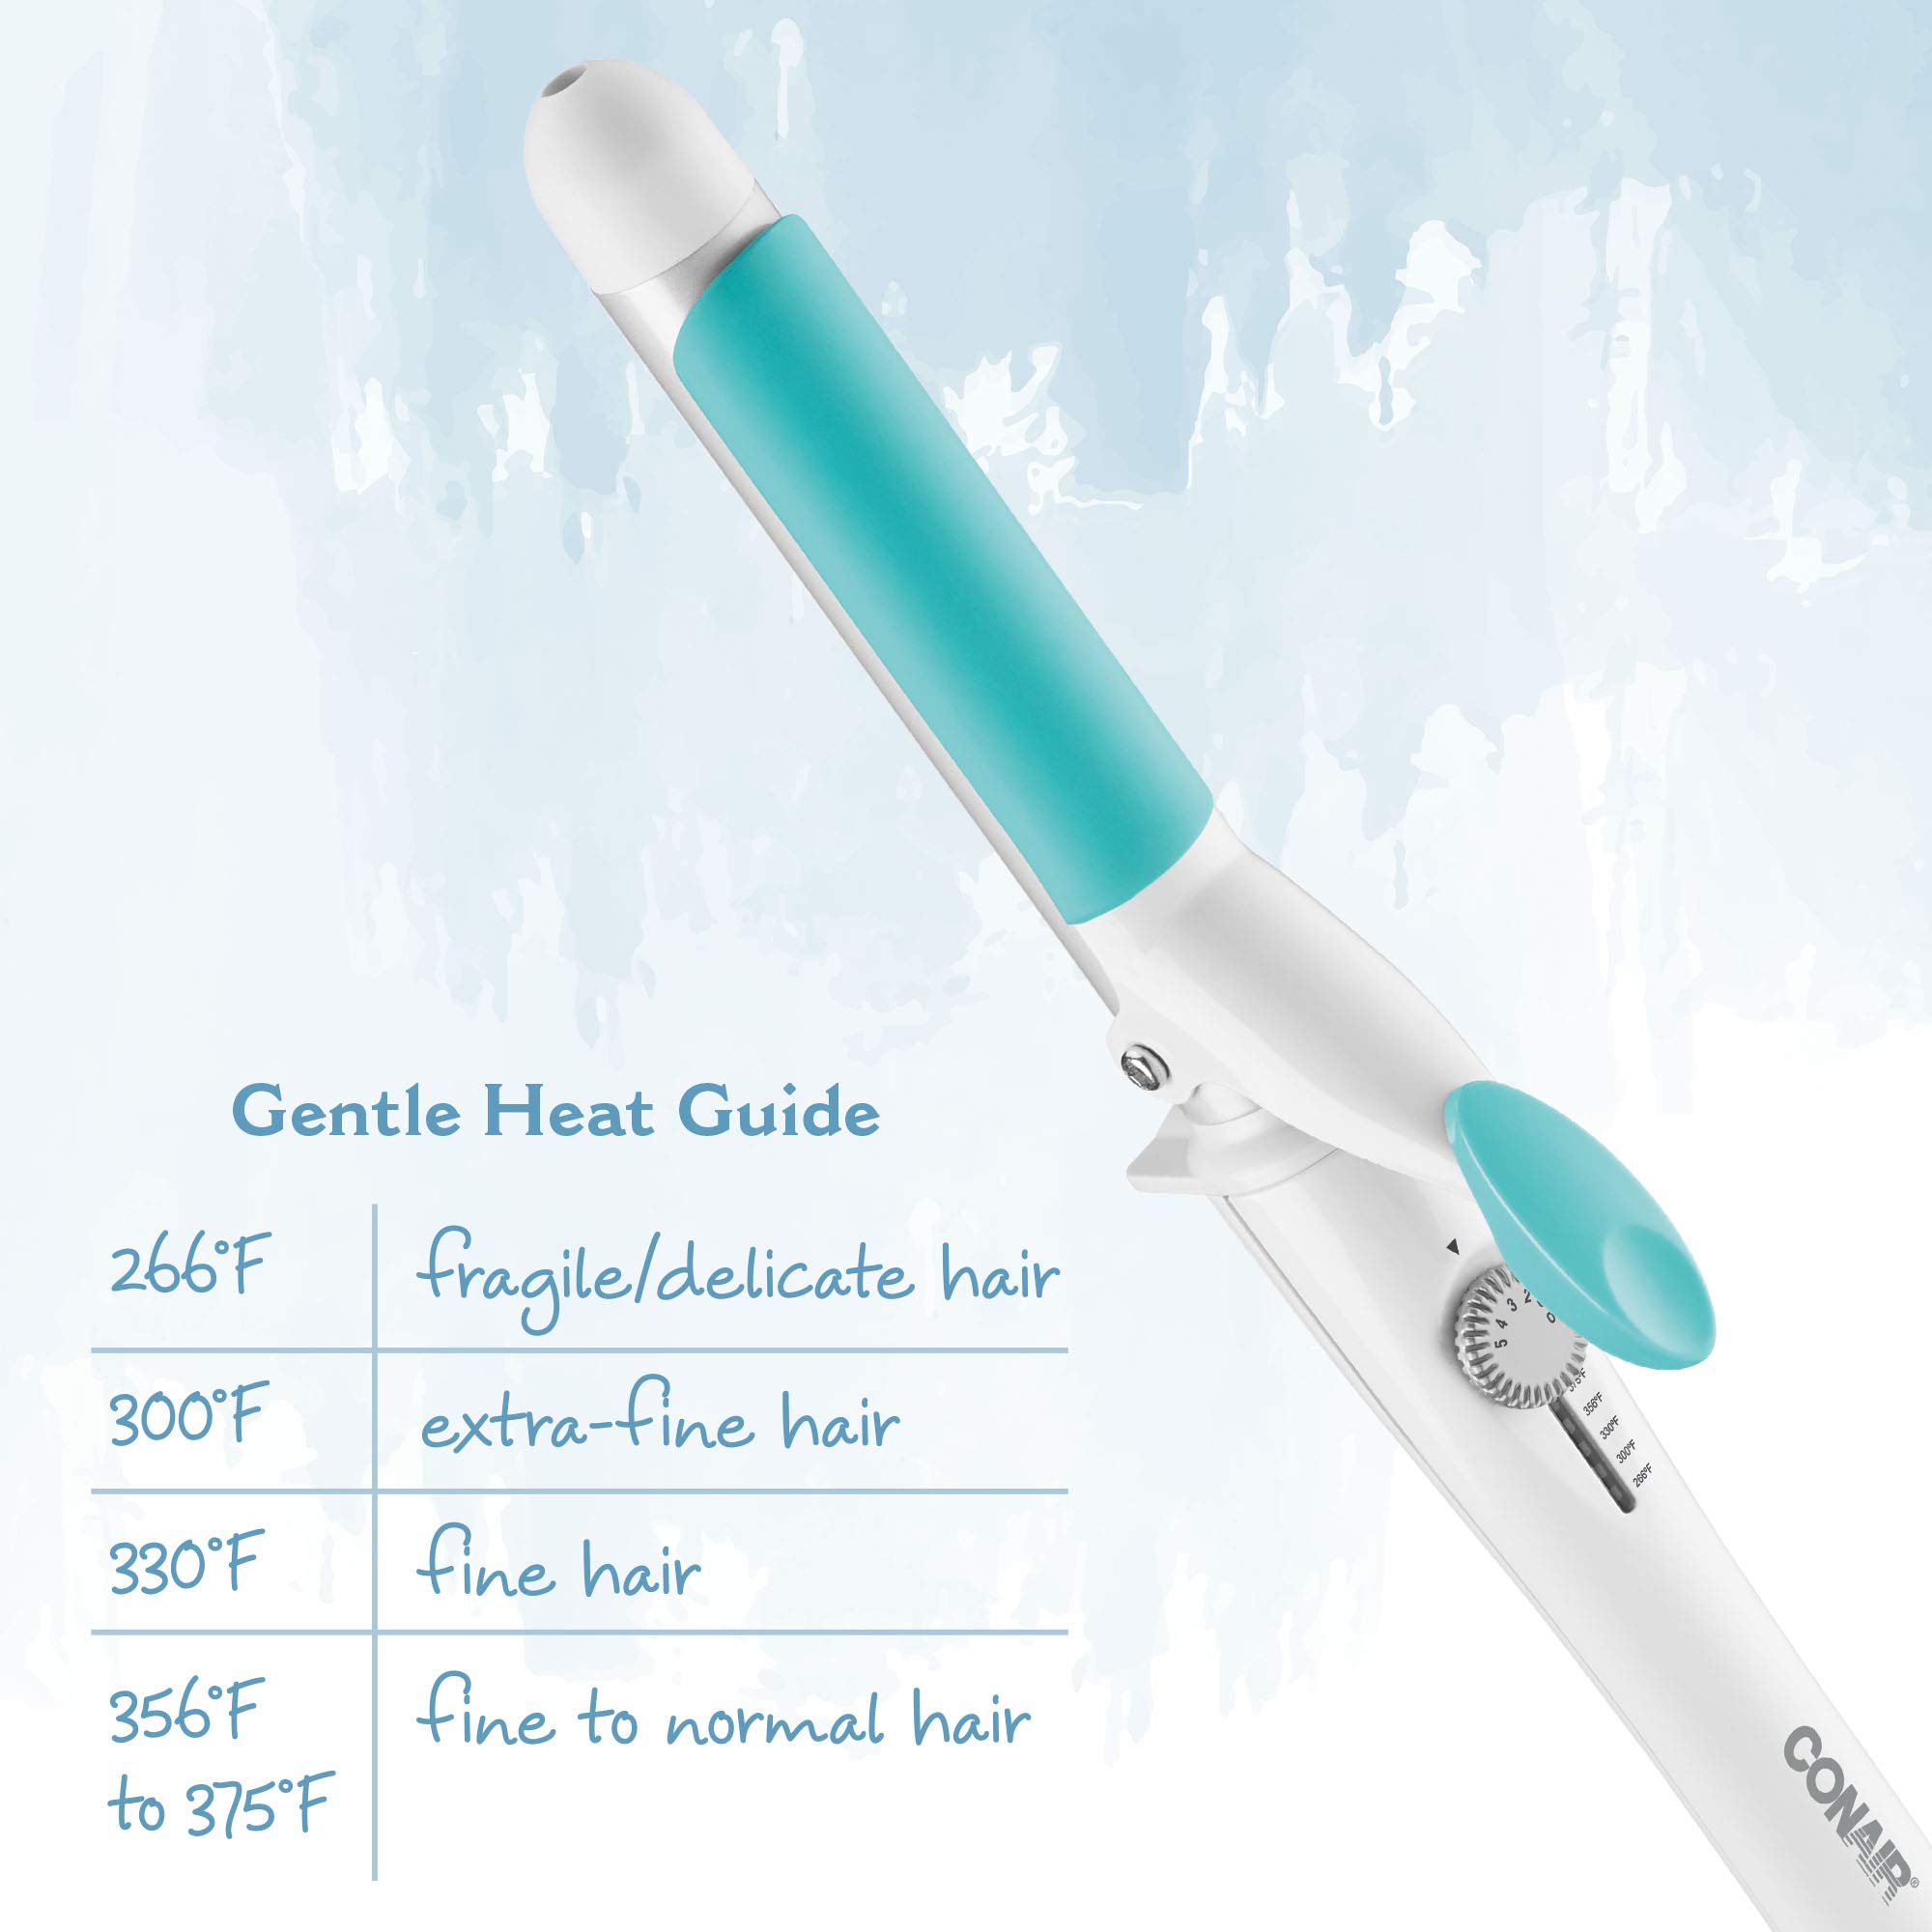 Conair OhSoKind For Fine Hair Curling Iron; 1-inch Curling Iron with Silicone Clip, 1-inch barrel produces classic curls – for use on short, medium, and long hair, White and Blue